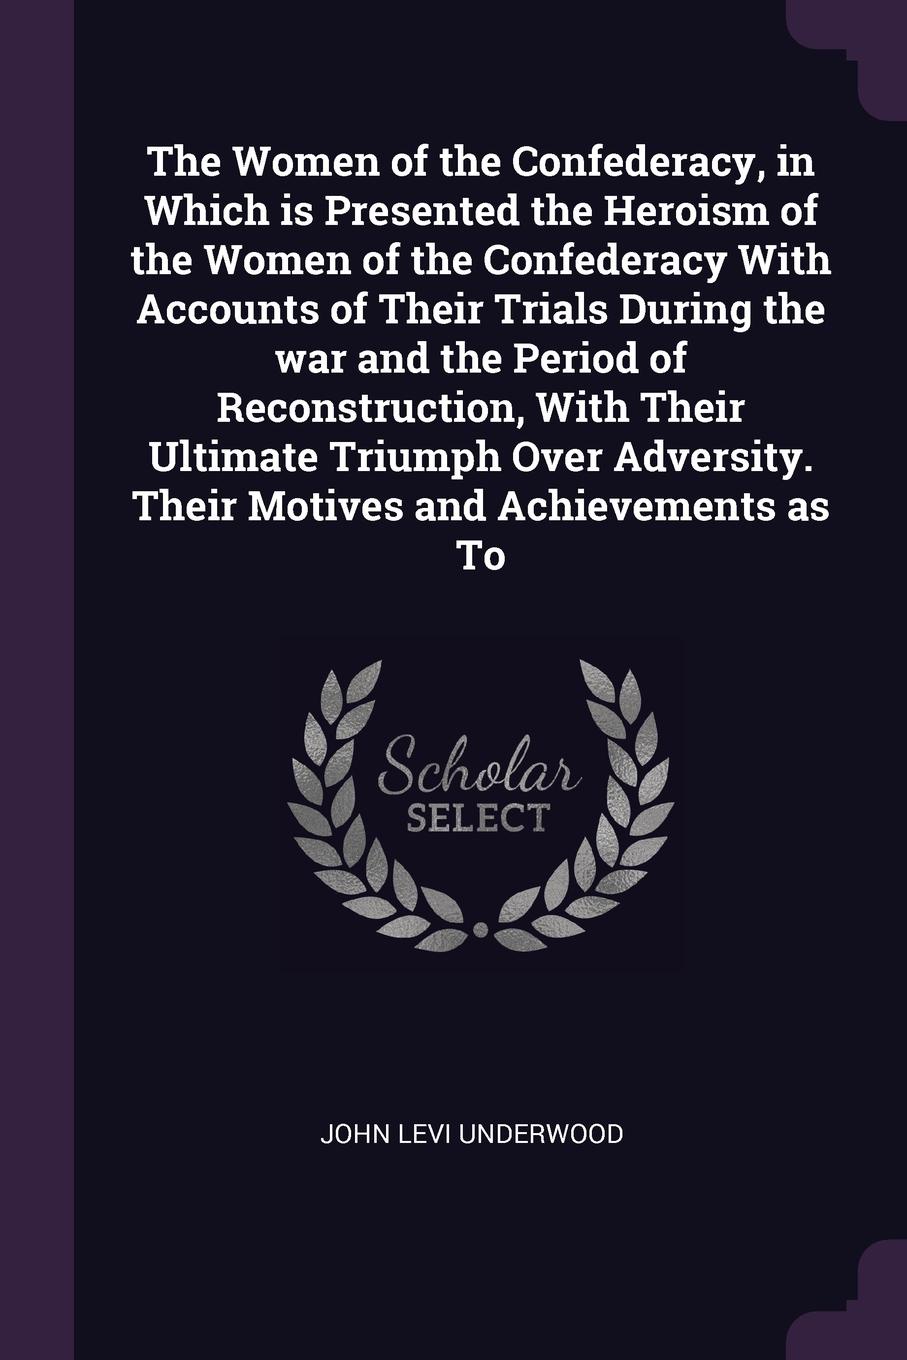 The Women of the Confederacy, in Which is Presented the Heroism of the Women of the Confederacy With Accounts of Their Trials During the war and the Period of Reconstruction, With Their Ultimate Triumph Over Adversity. Their Motives and Achievemen...